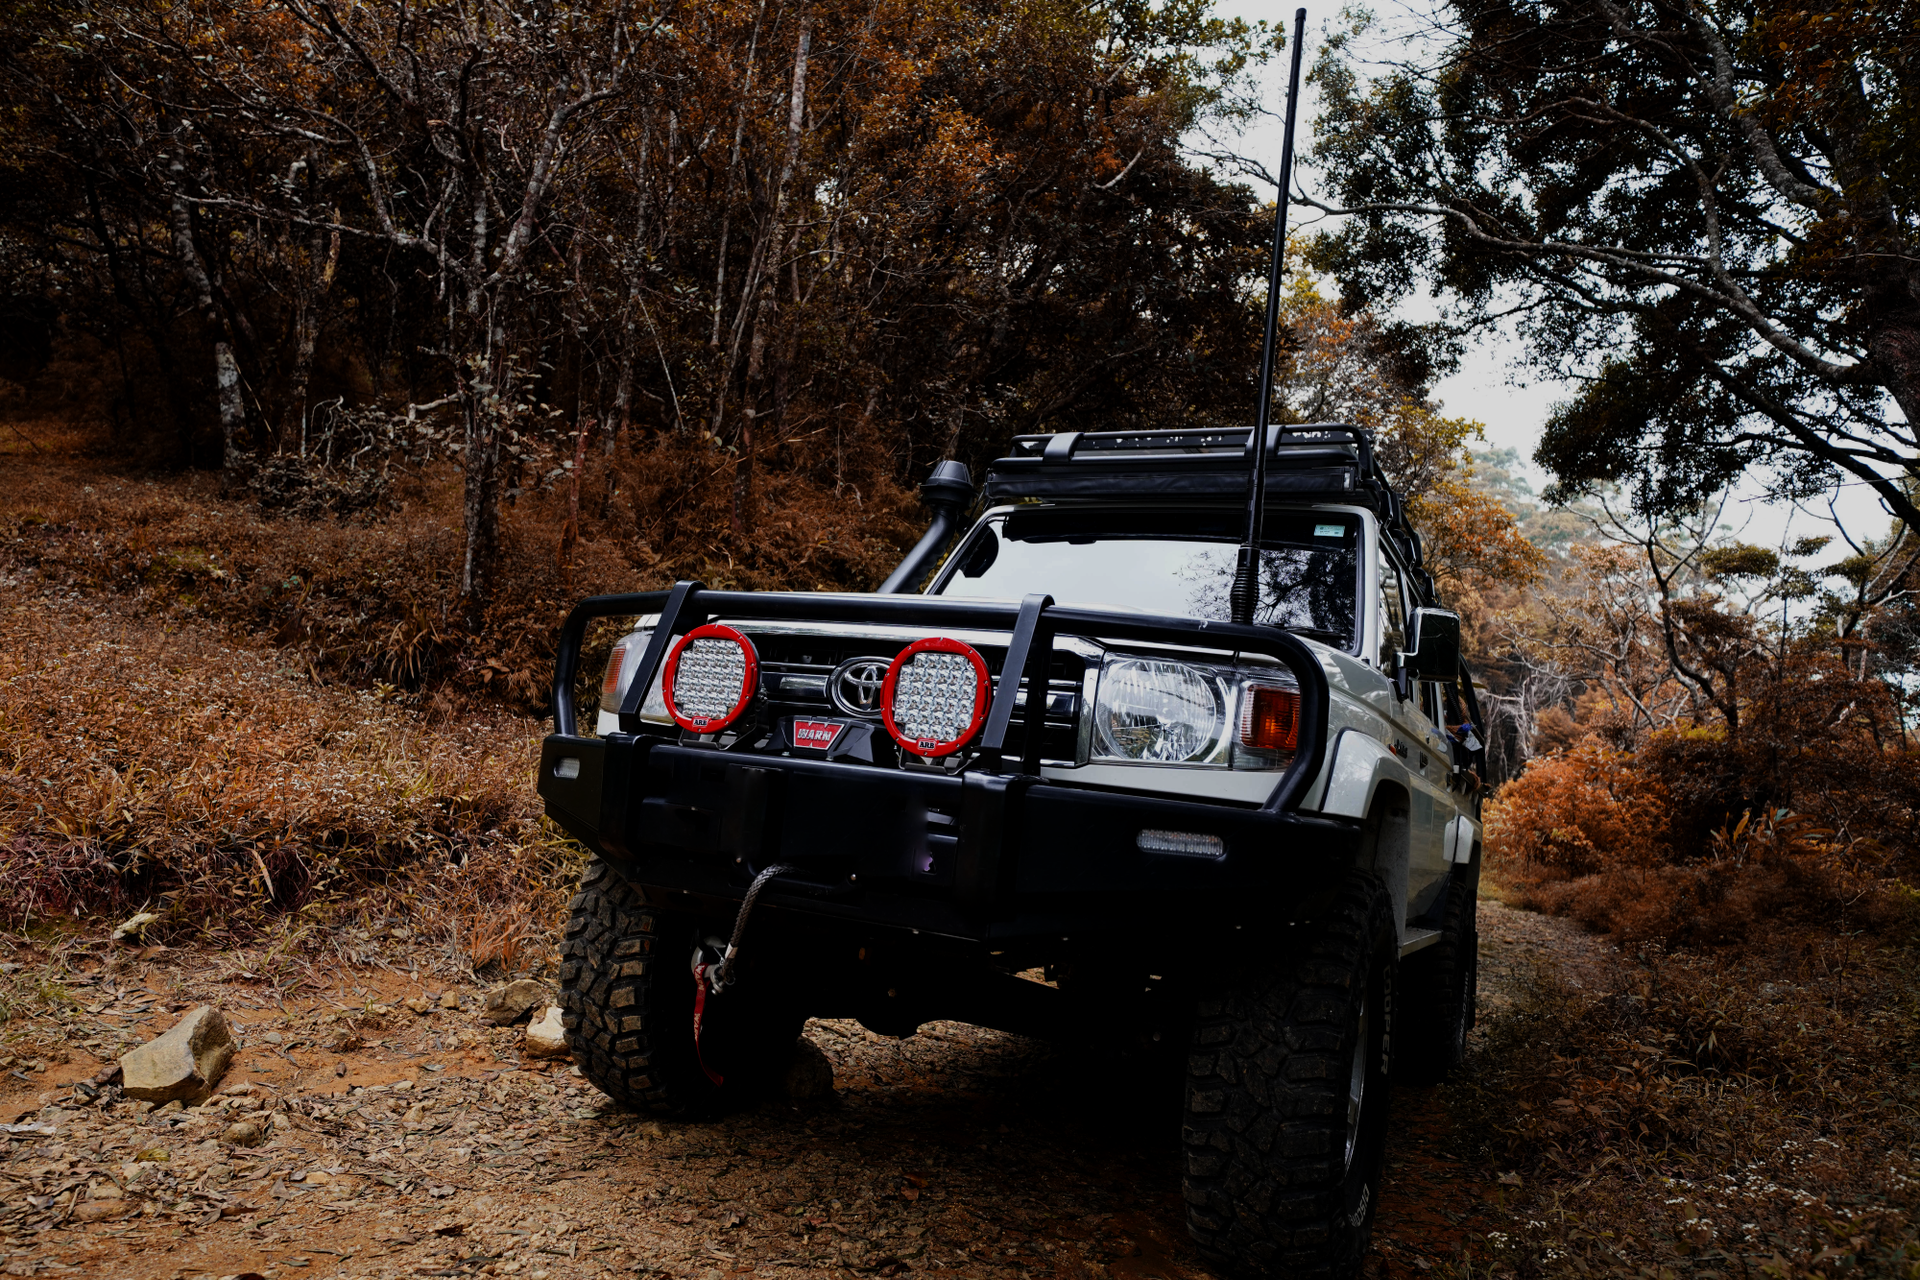 A jeep is parked on a dirt road in the woods.